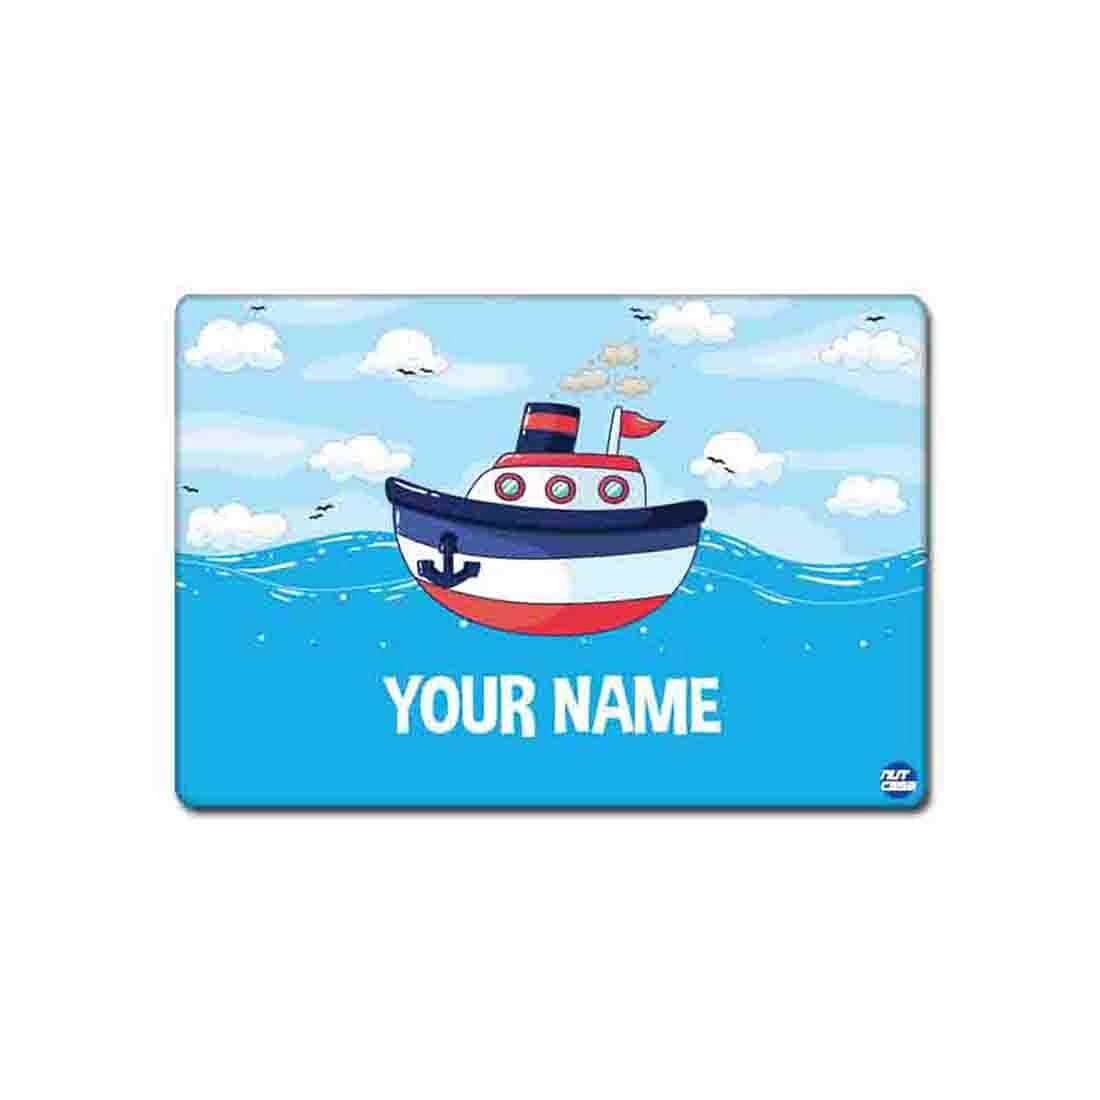 Custom Printed Placemats for Kids Birthday Return Gifts - Ship Nutcase